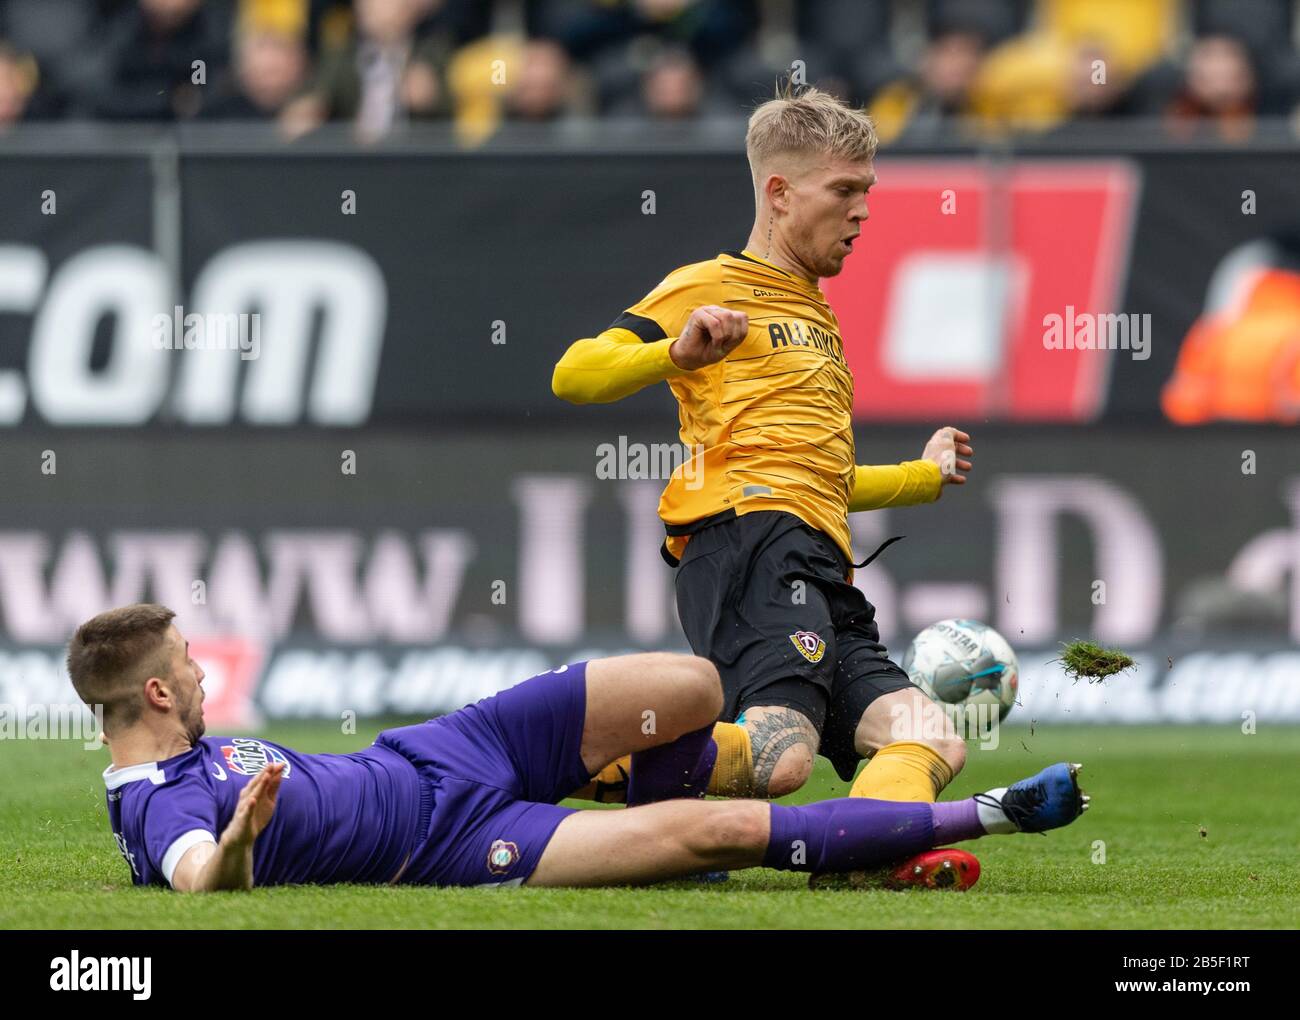 Dresden, Germany. 08th Mar, 2020. Football: 2nd Bundesliga, SG Dynamo Dresden - FC Erzgebirge Aue, 25th matchday, at the Rudolf Harbig Stadium. Dynamos Simon Makienok (r) against Aues Marko Mihojevic. Credit: Robert Michael/dpa-Zentralbild/dpa - IMPORTANT NOTE: In accordance with the regulations of the DFL Deutsche Fußball Liga and the DFB Deutscher Fußball-Bund, it is prohibited to exploit or have exploited in the stadium and/or from the game taken photographs in the form of sequence images and/or video-like photo series./dpa/Alamy Live News Stock Photo